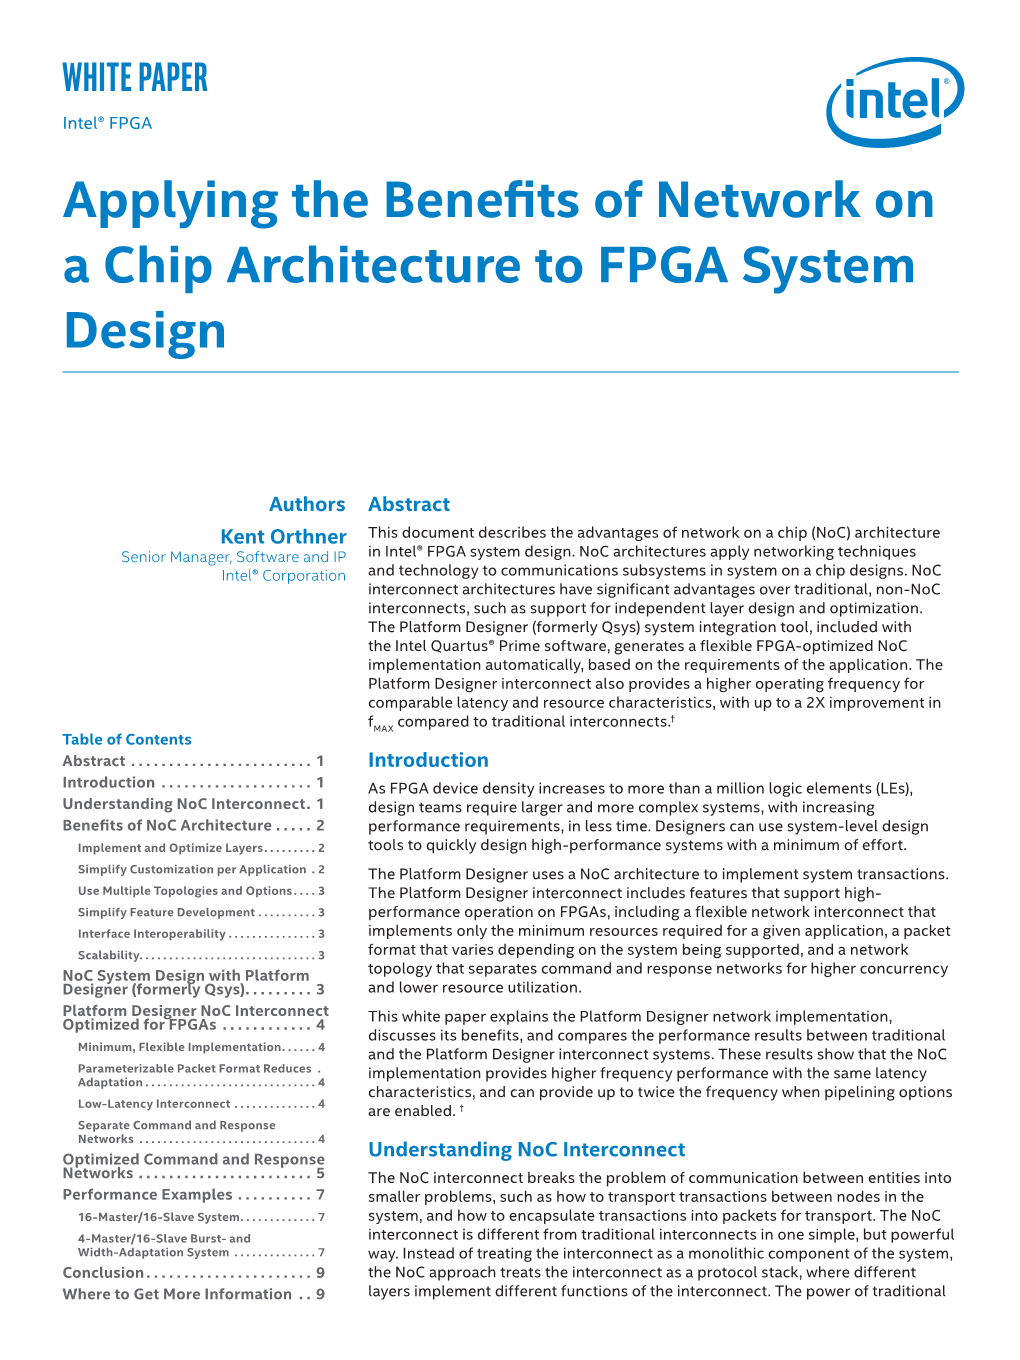 Applying the Benefits of Network on a Chip Architecture to FPGA System Design